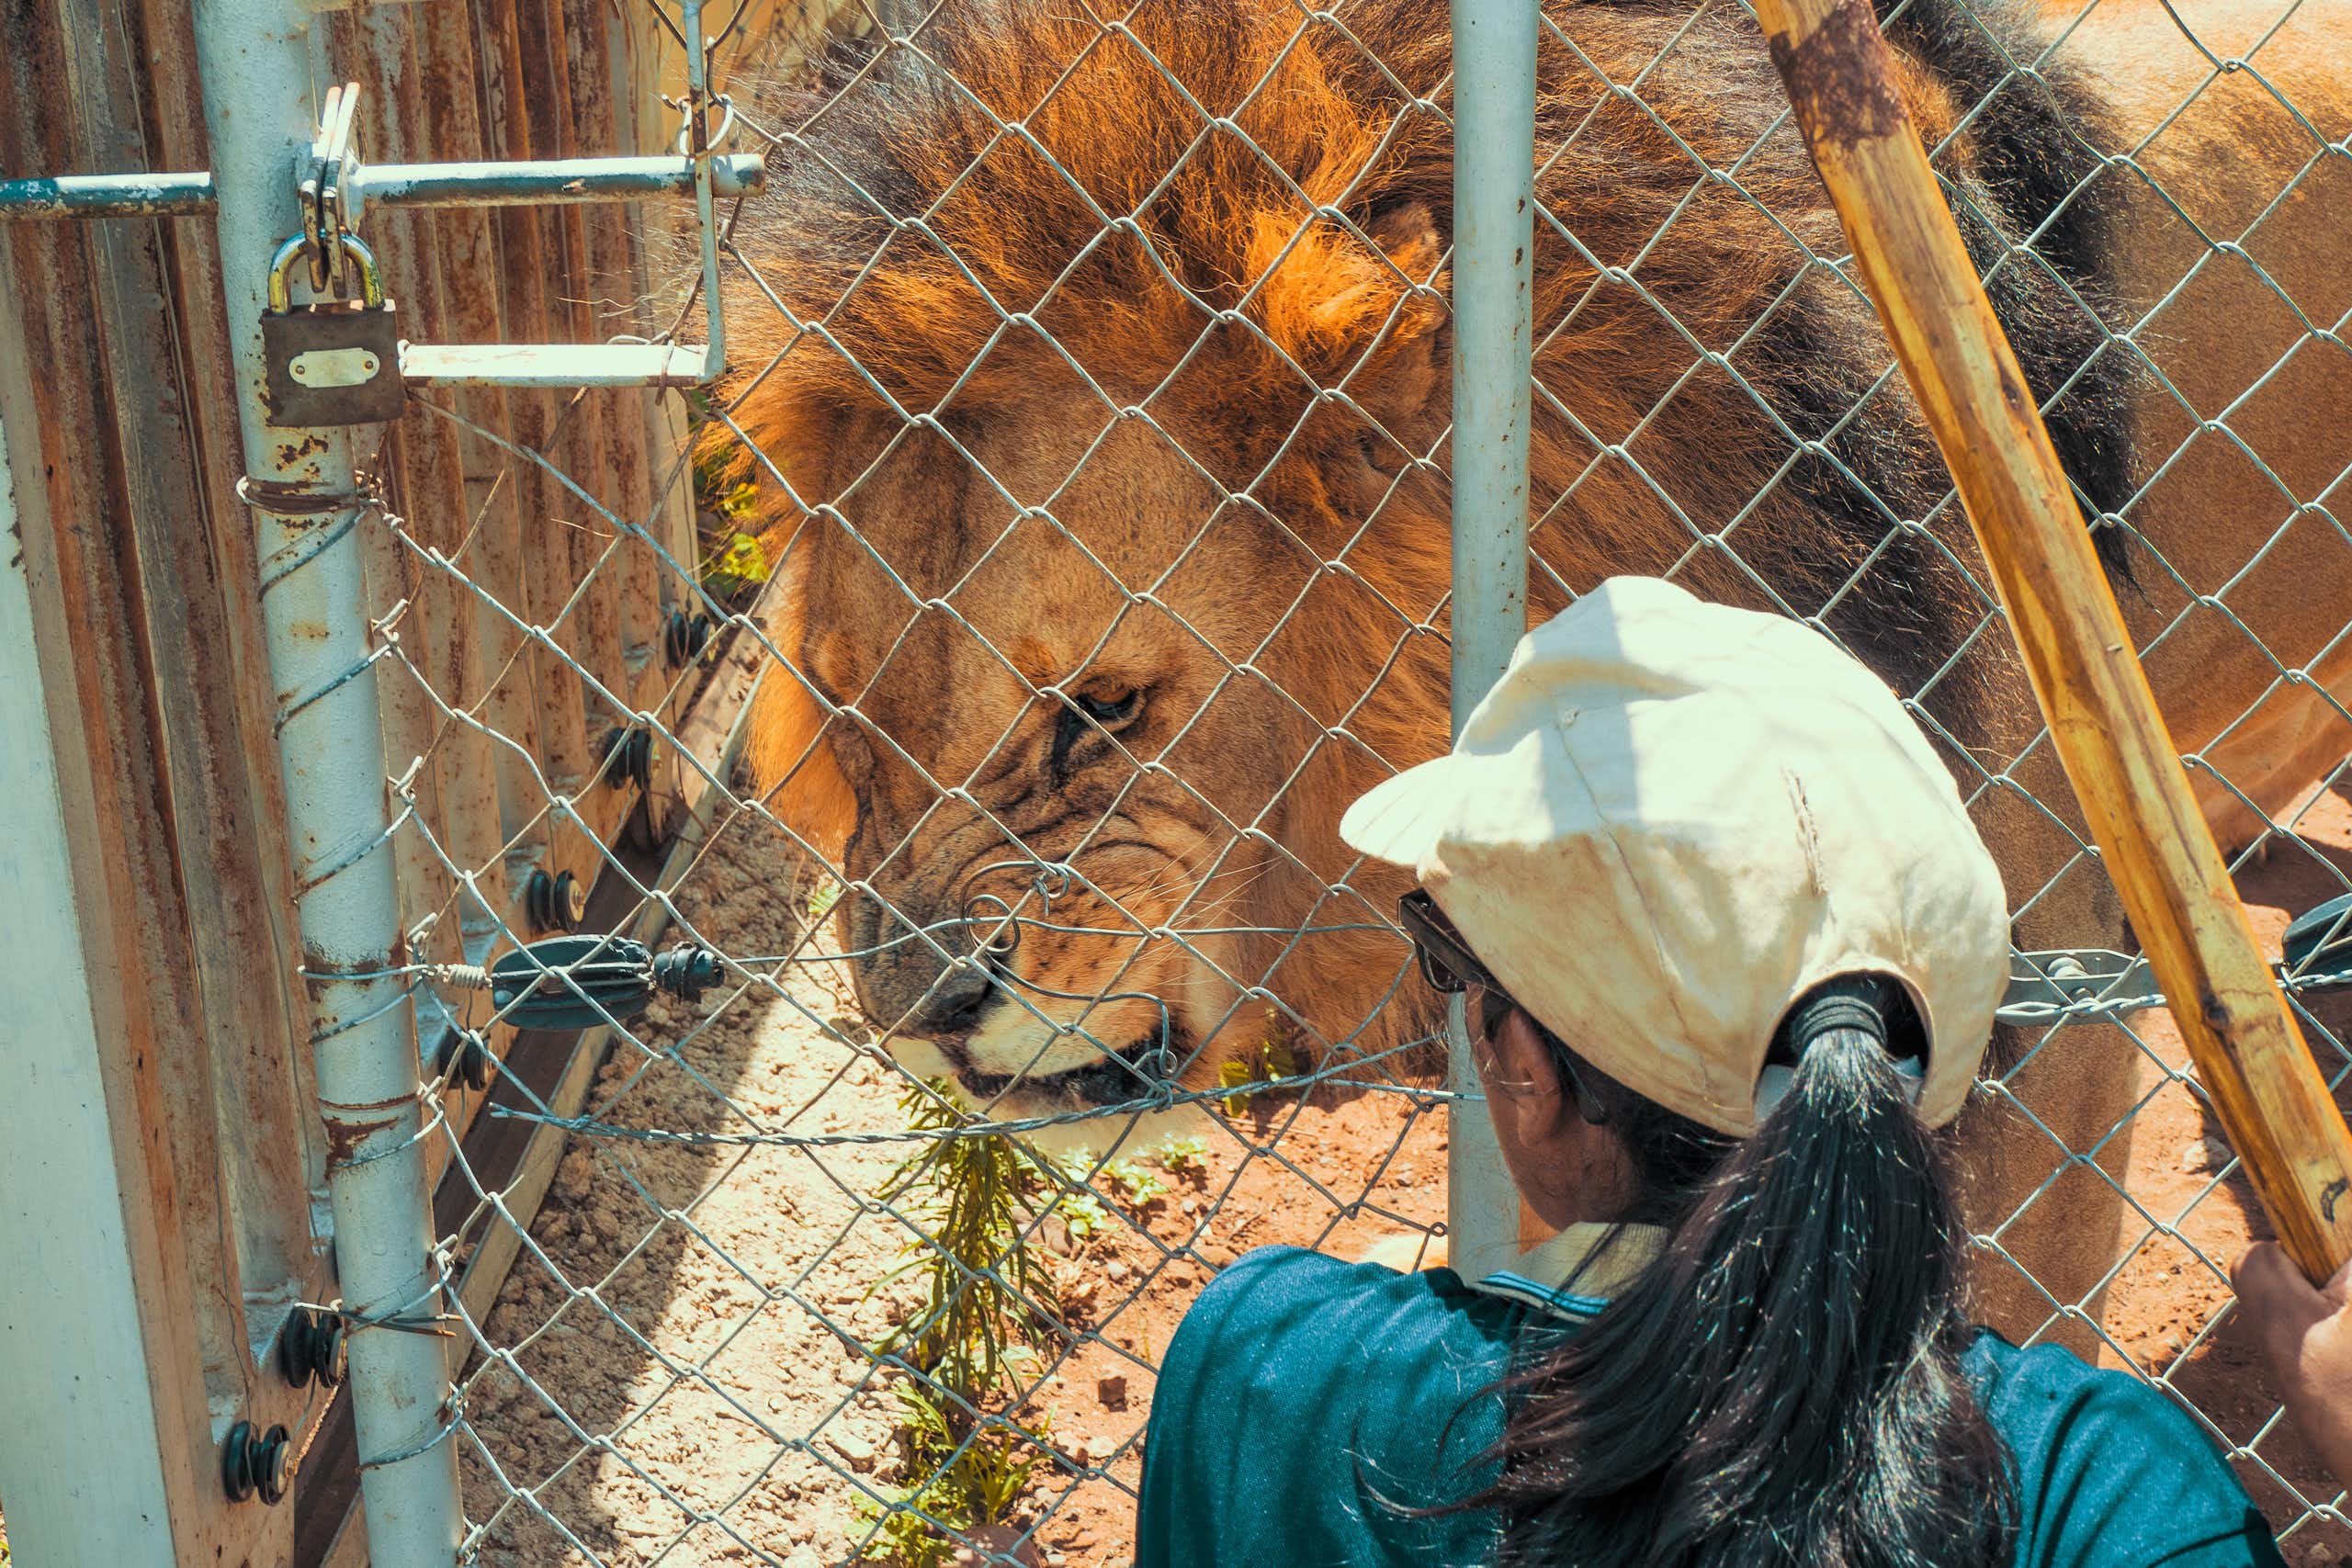 A male lion behind a wire enclosure, with a person on the other side.